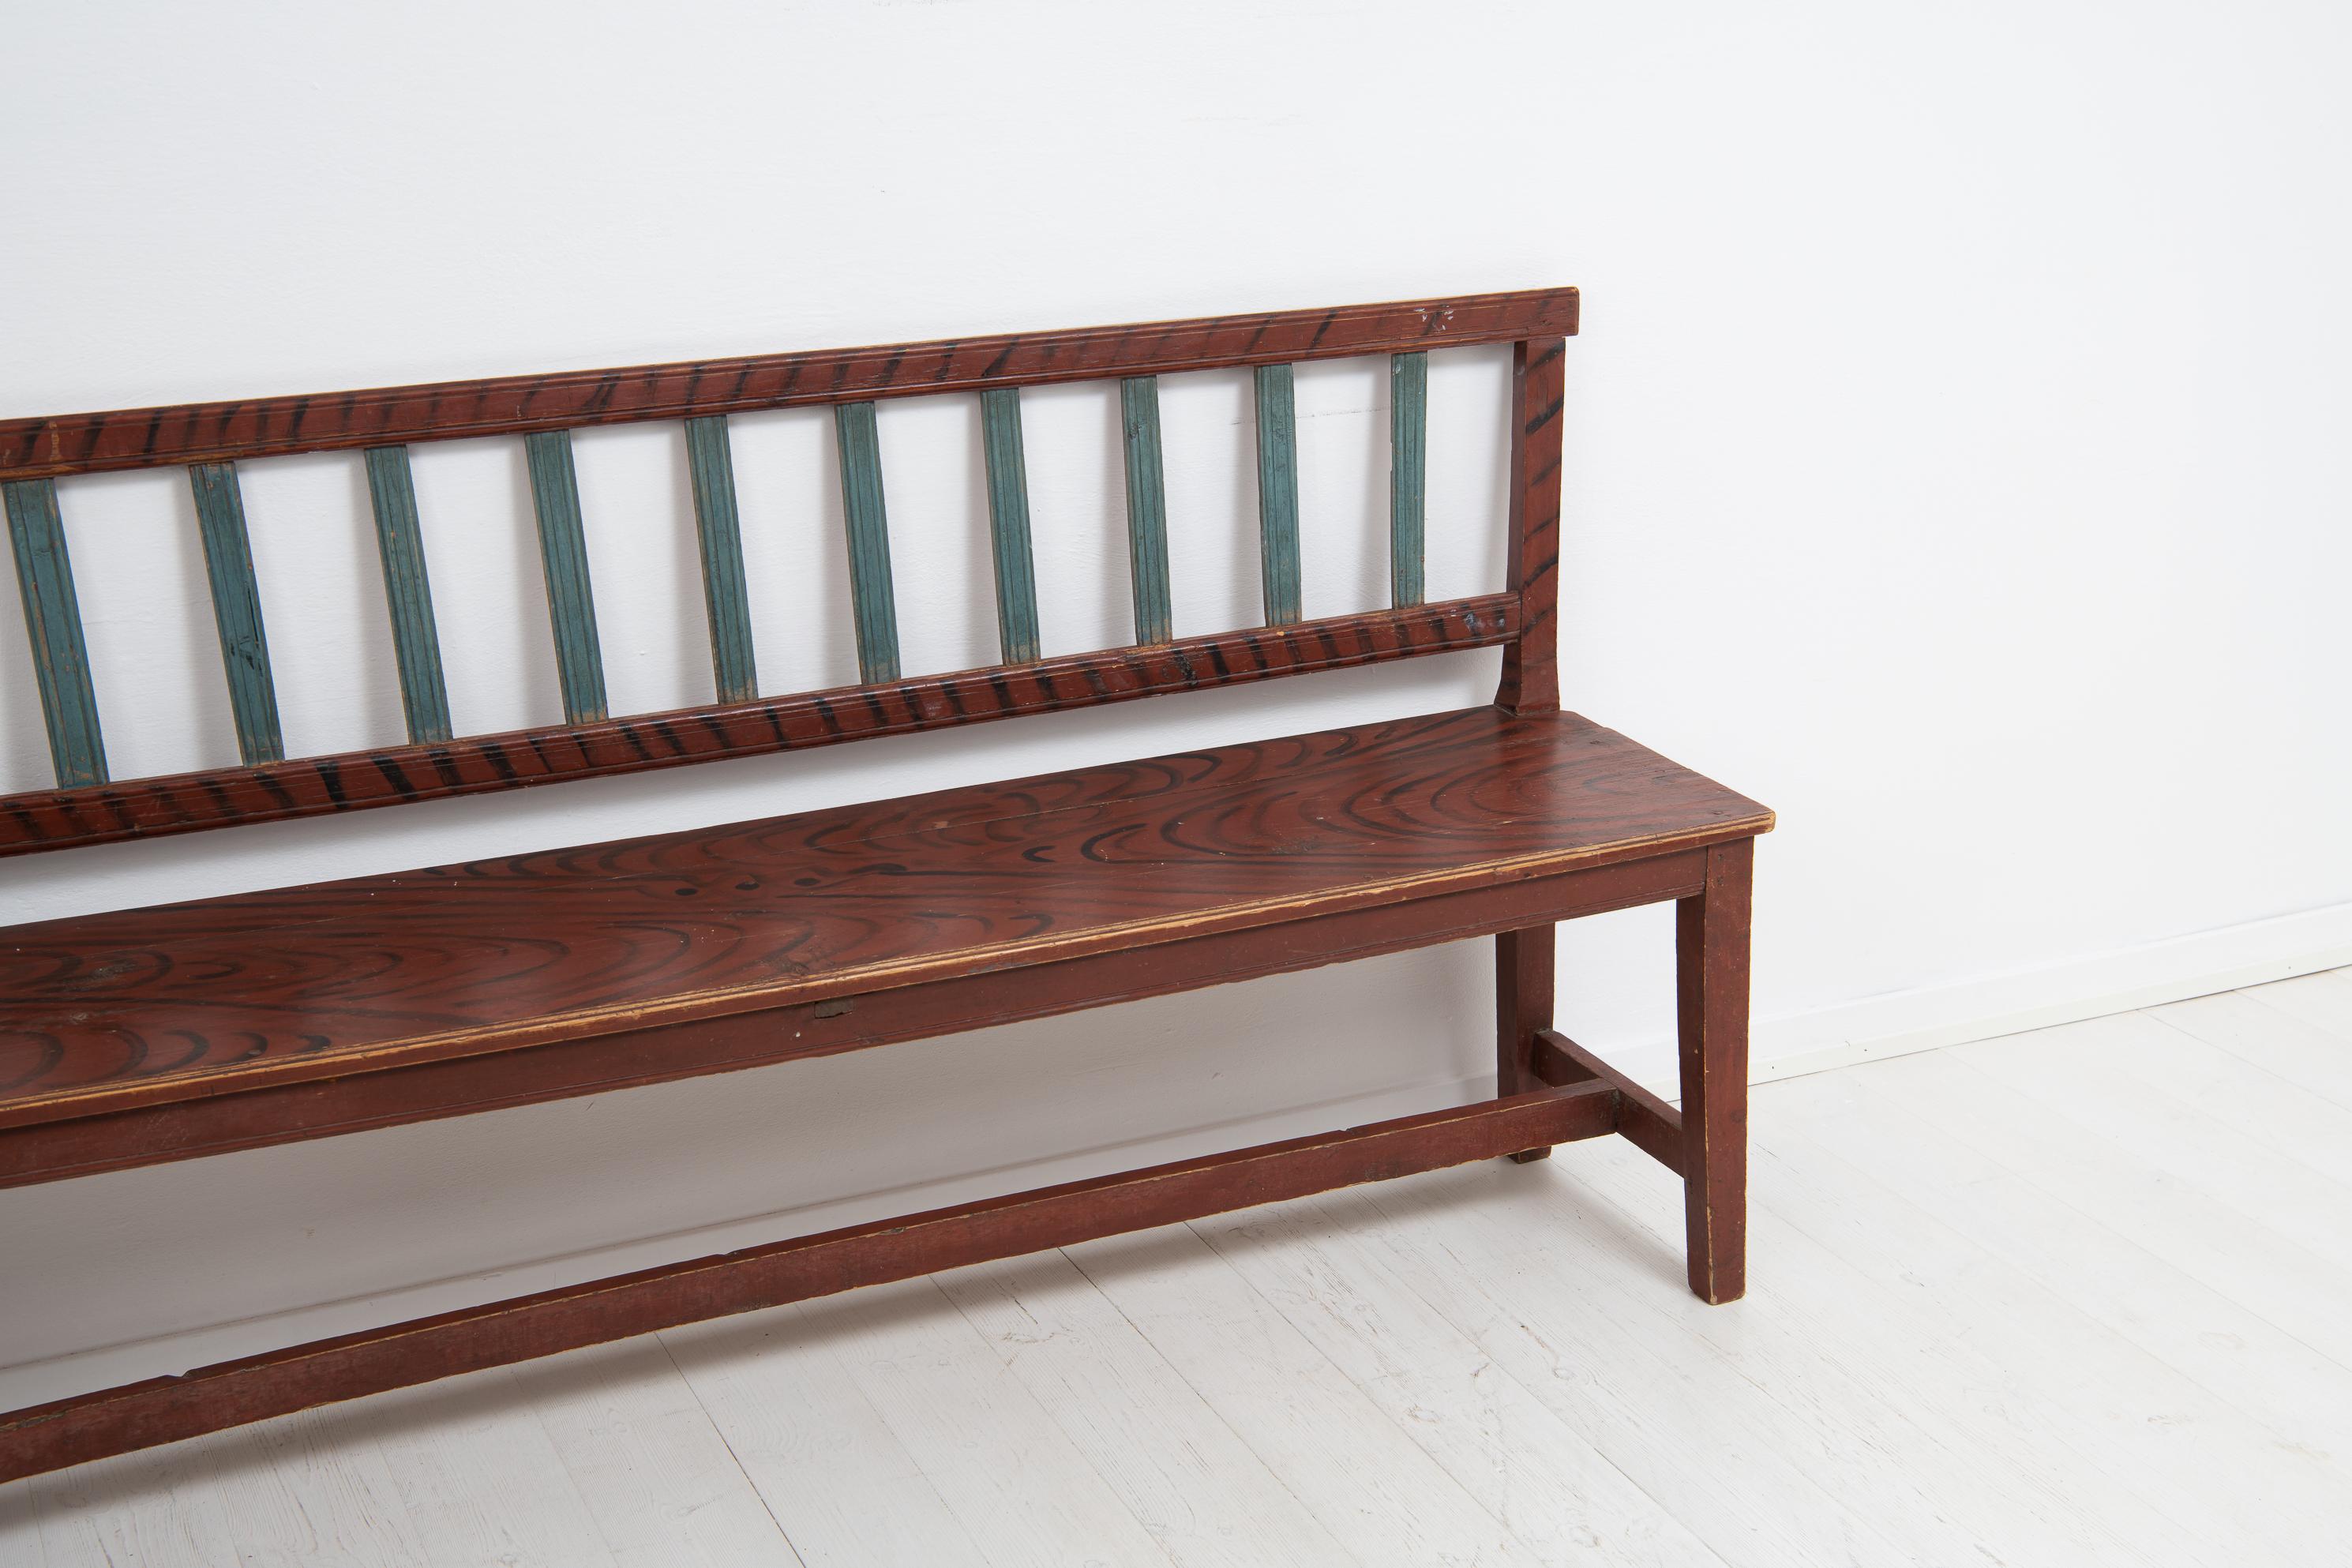 Pine Early 19th Century Swedish Gustavian Folk Art Country Sofa or Bench For Sale